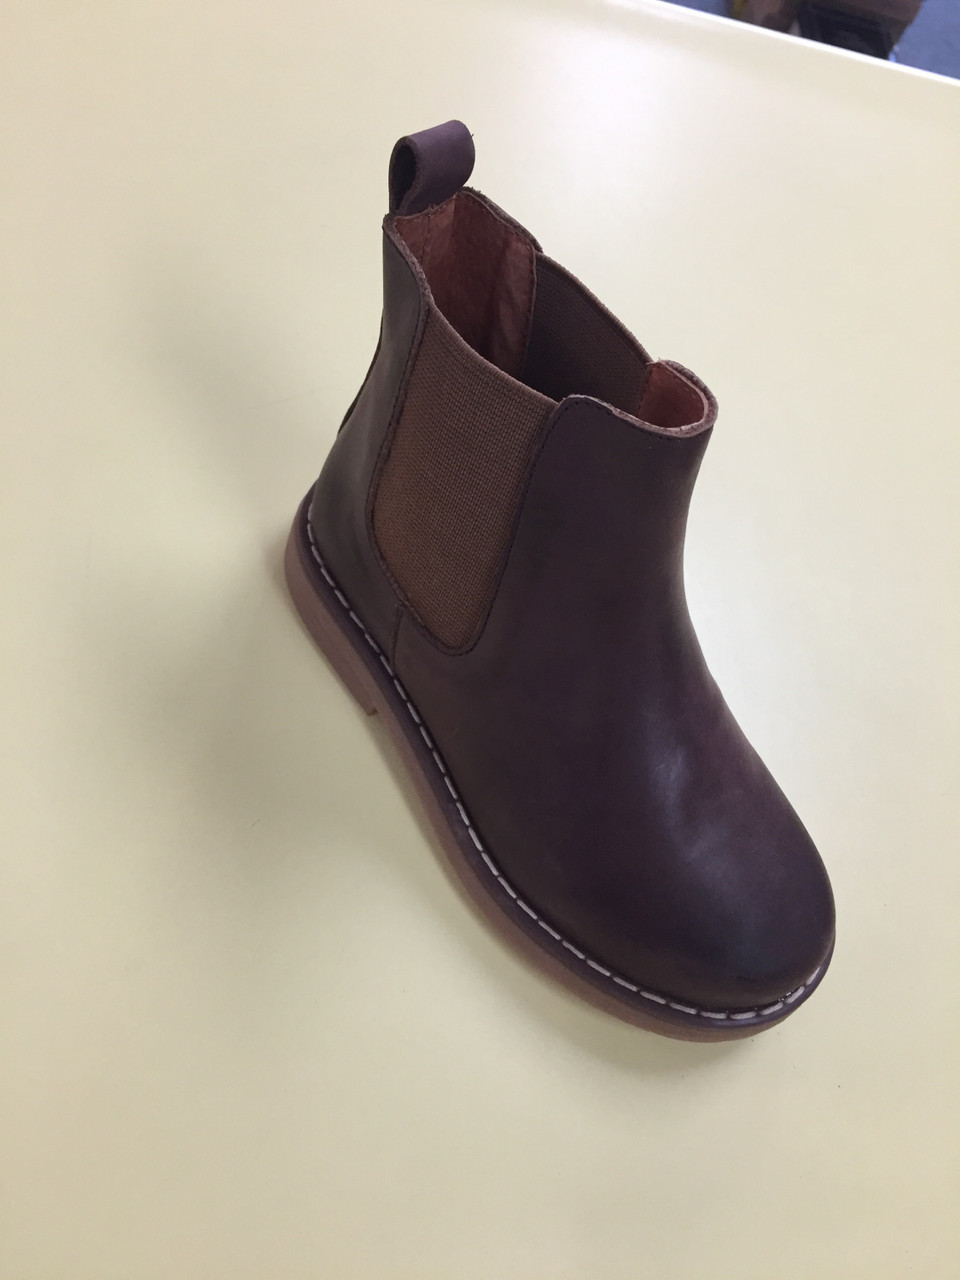 chocolate chelsea boots